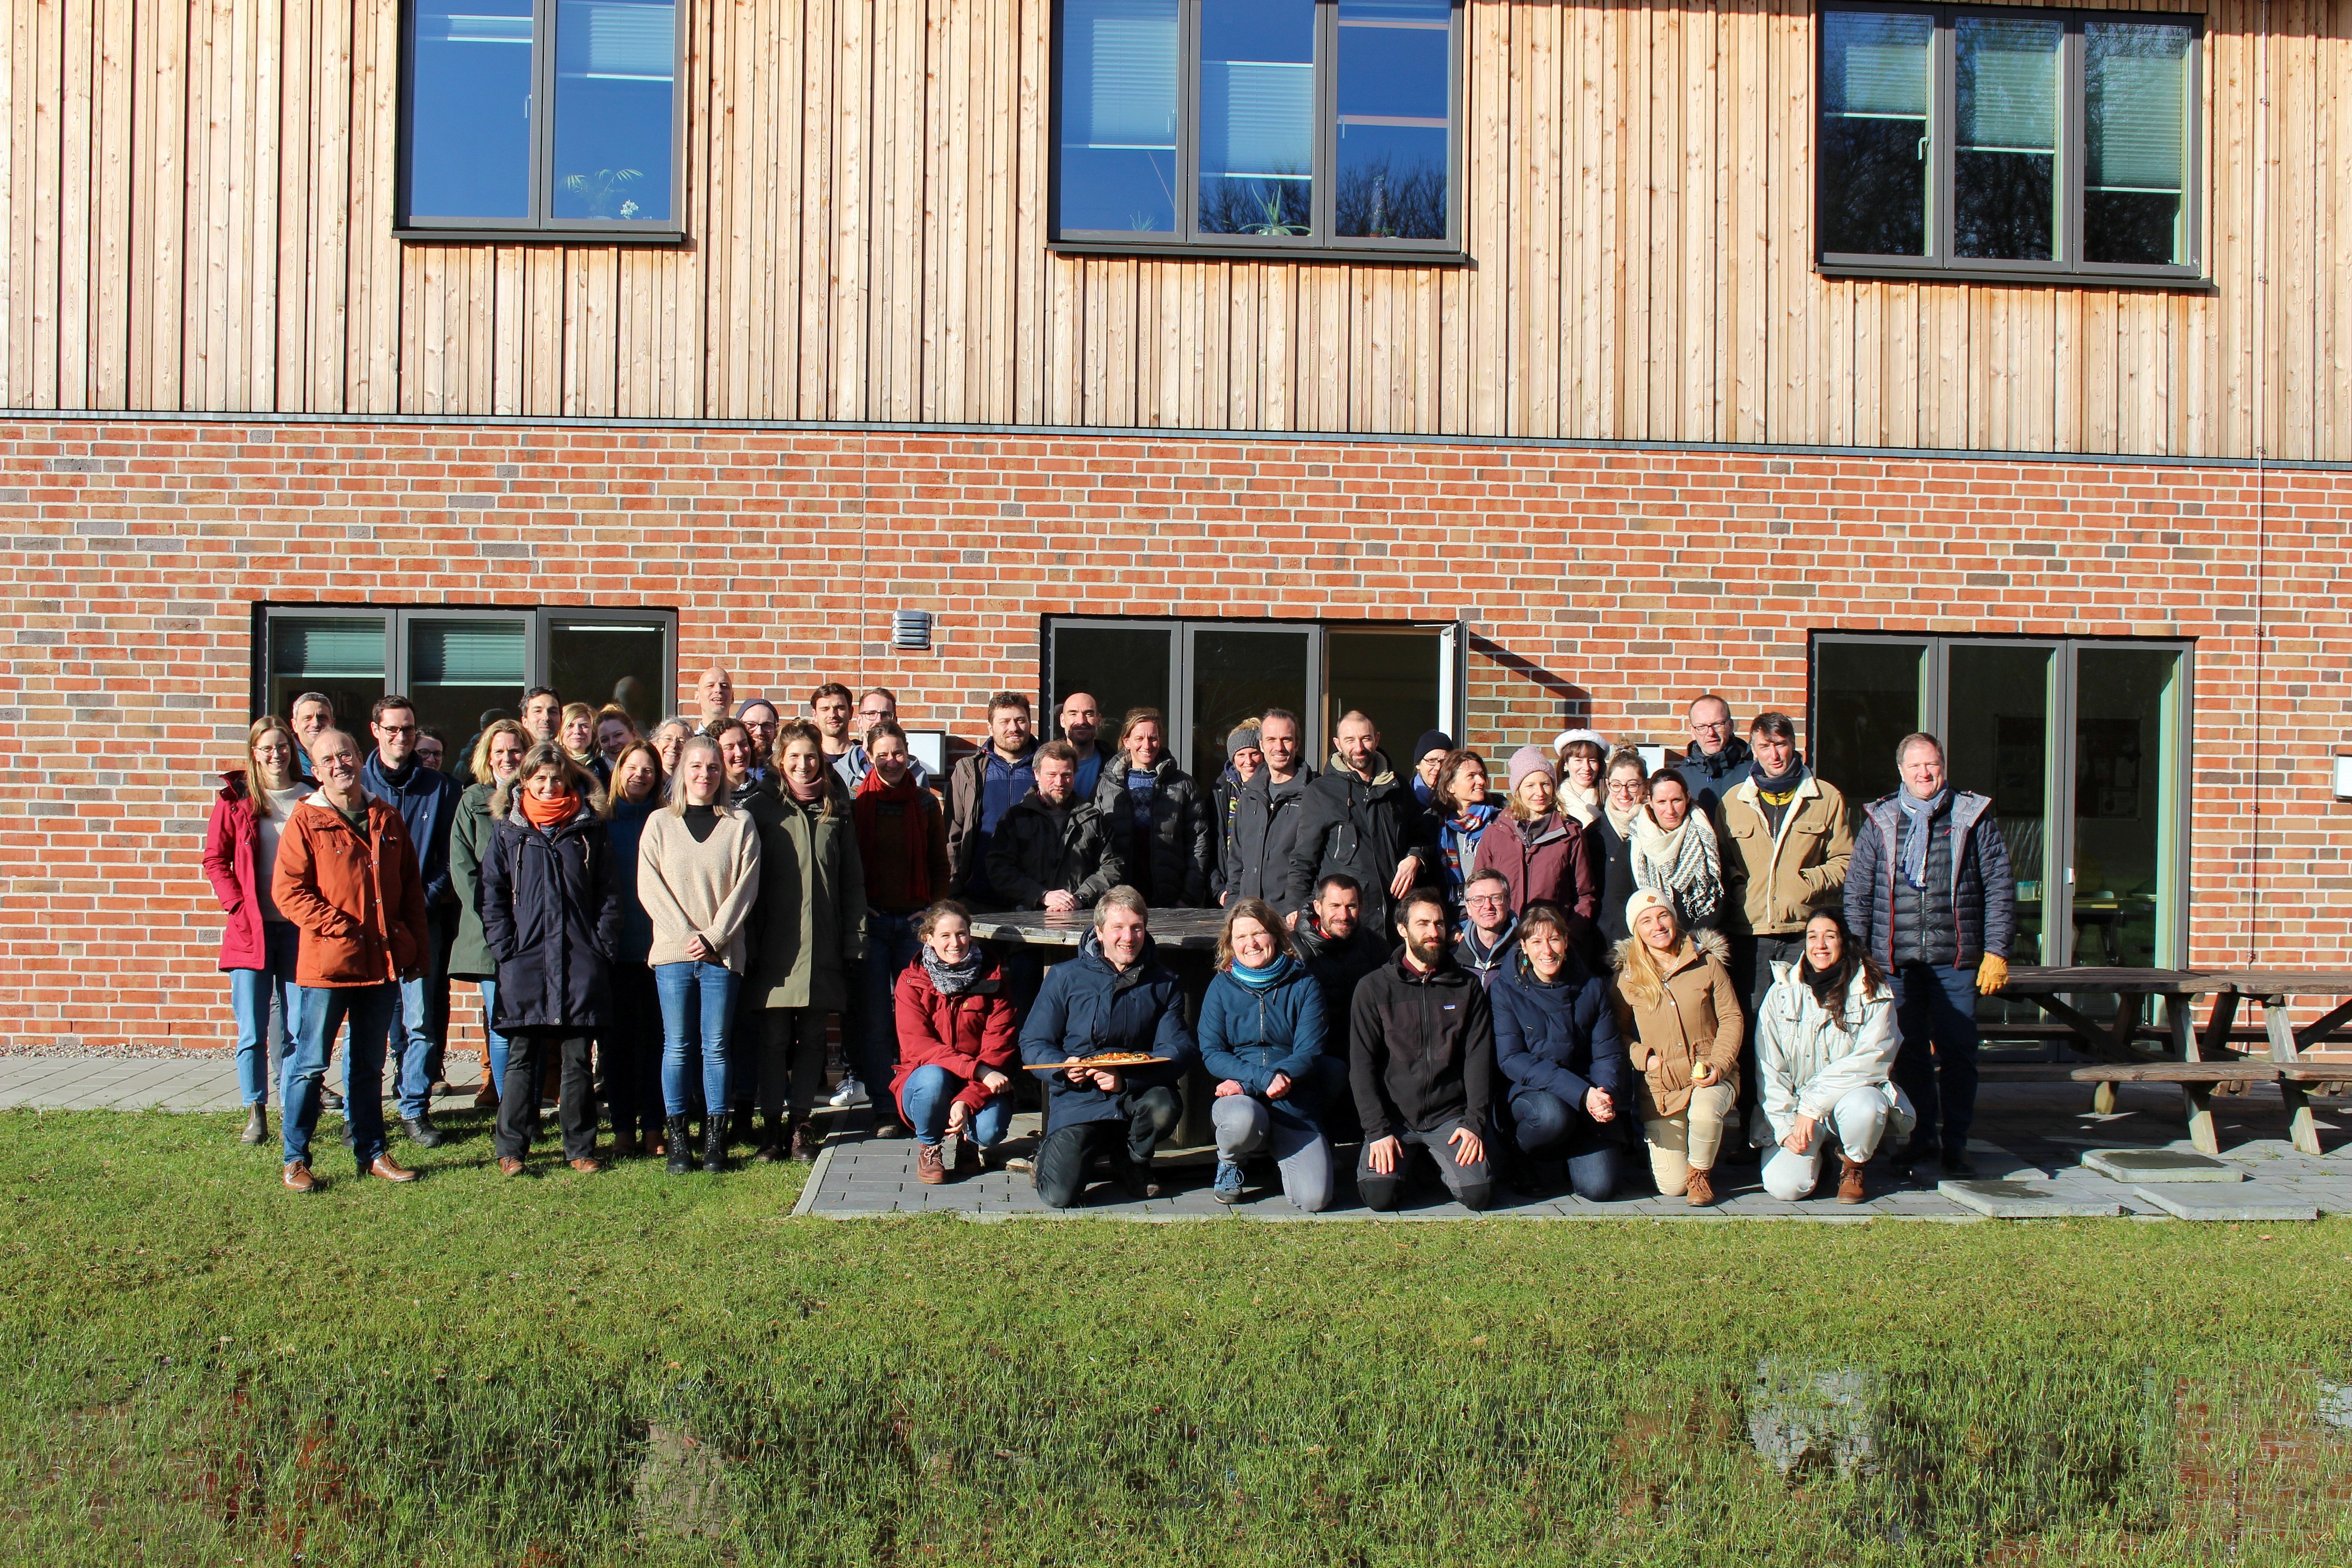 A group photo with colleagues from BioConsult SH and Biotope in front of the BioConsult SH company building.